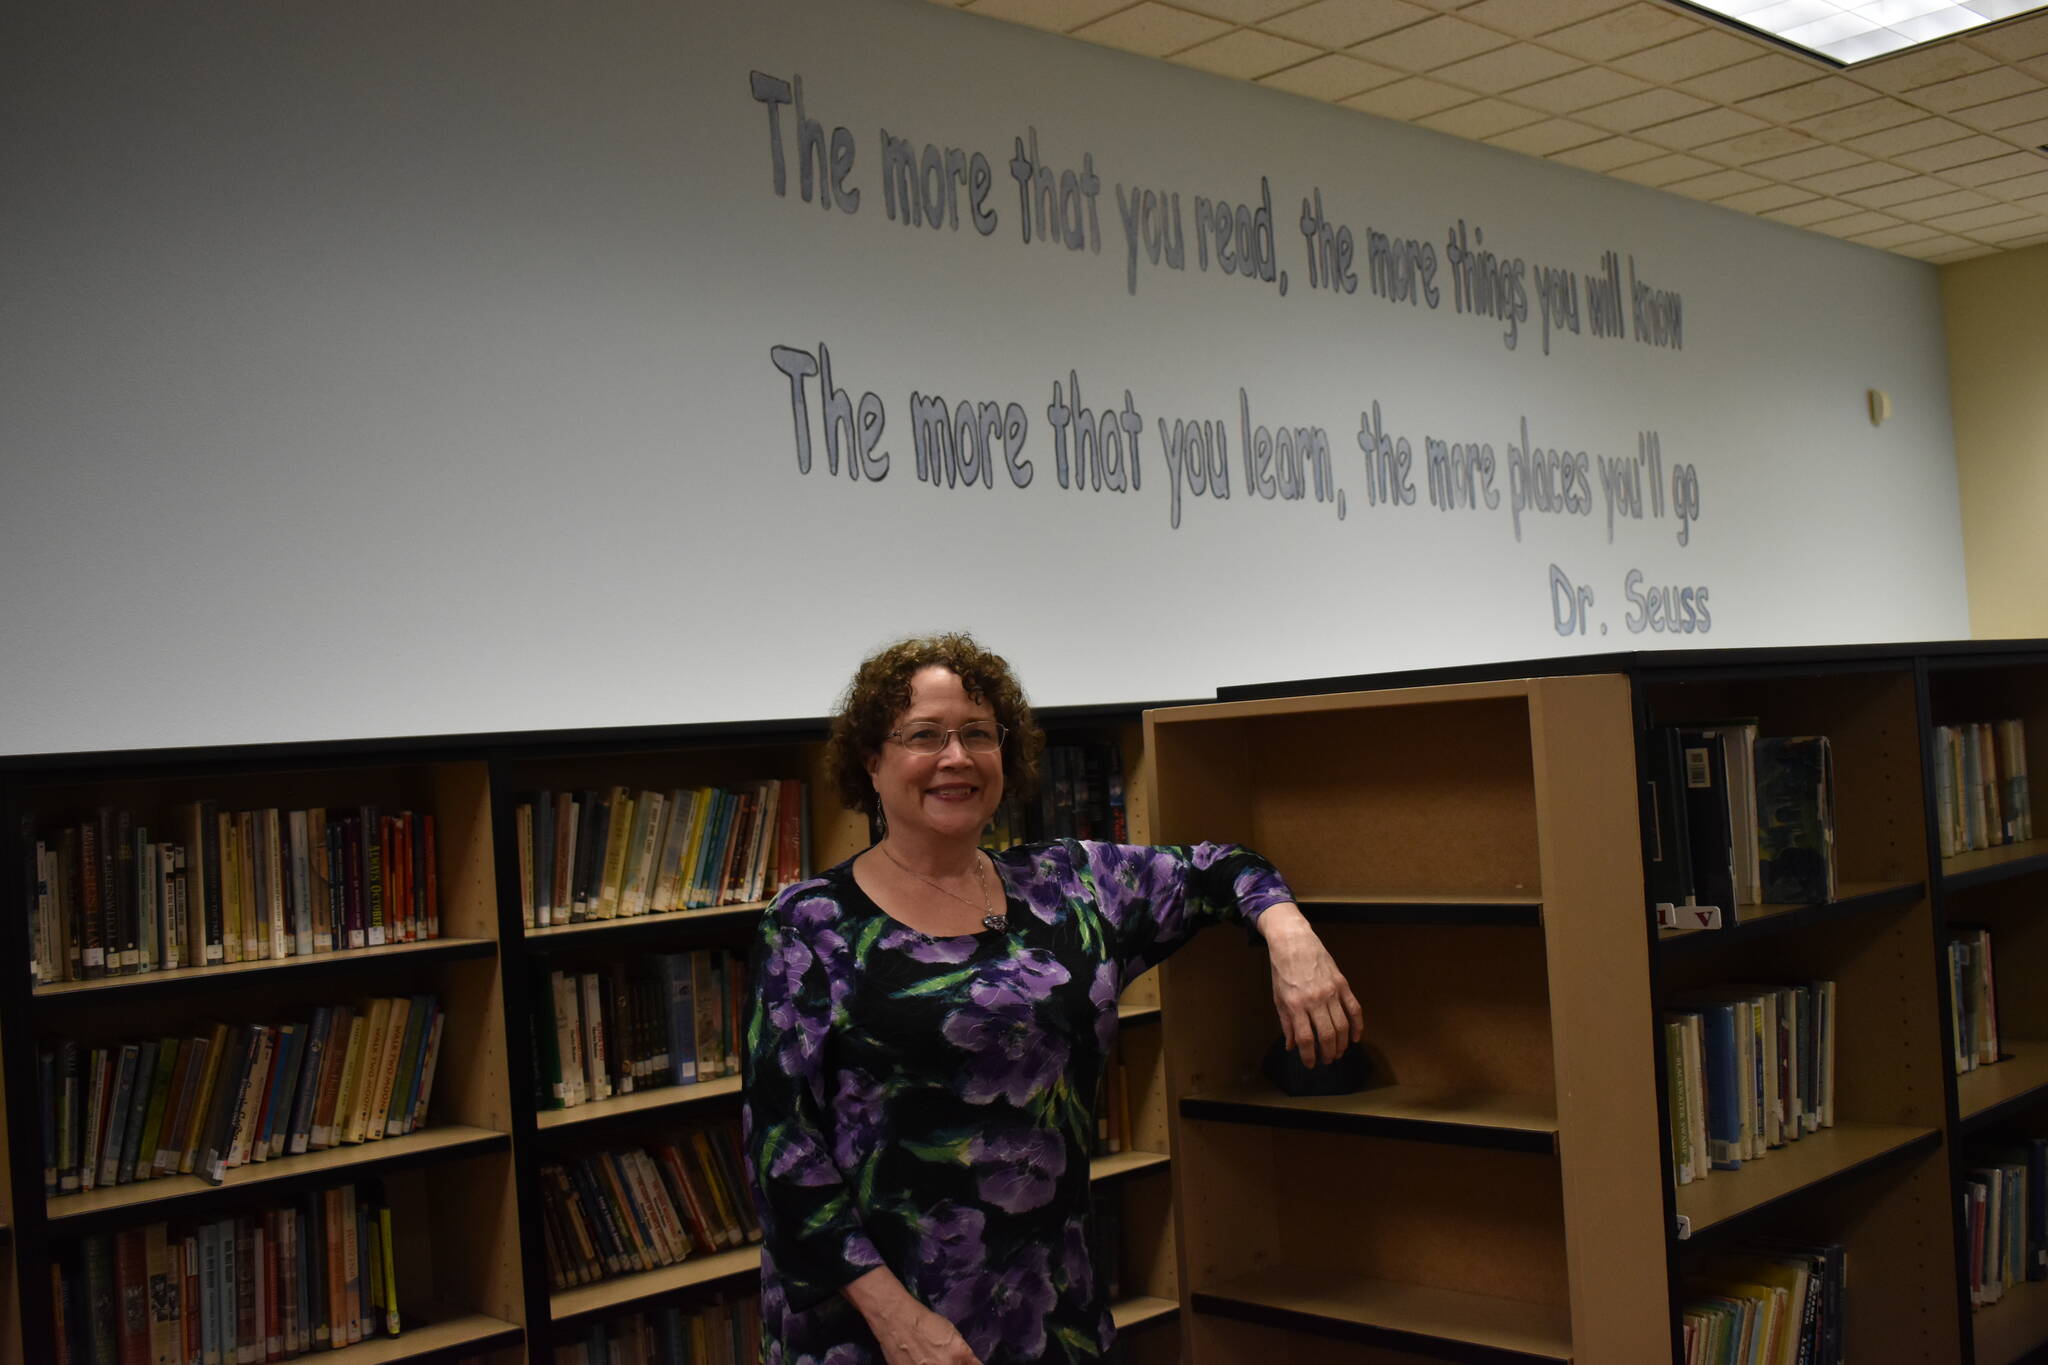 Lisa Templeton, who teaches third grade at McDermoth Elementary School, was recently named Aberdeen School District’s “Teacher of the Year.” Her school principal, Bryan McKinney, wrote about Templeton, “It is hard to imagine any light shining brighter than Mrs. Templeton for our students here in Aberdeen, Washington.” Matthew N. Wells | The Daily World